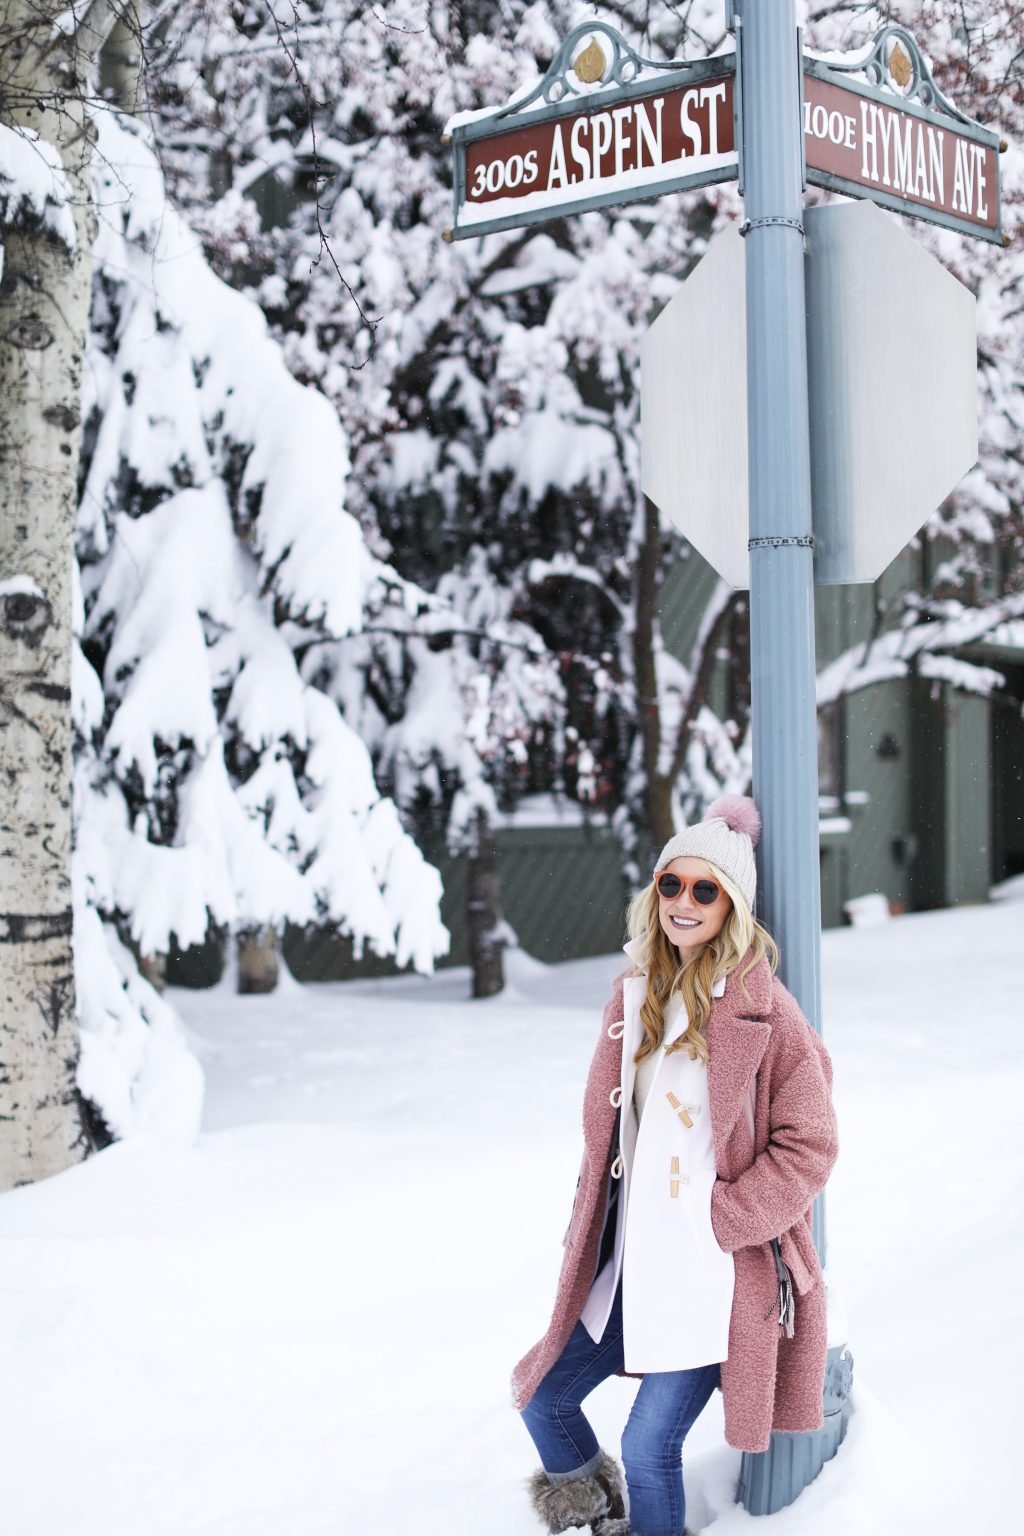 aspen-cute-outfit-streets-snow-holiday-outfit-ideas-what-to-wear